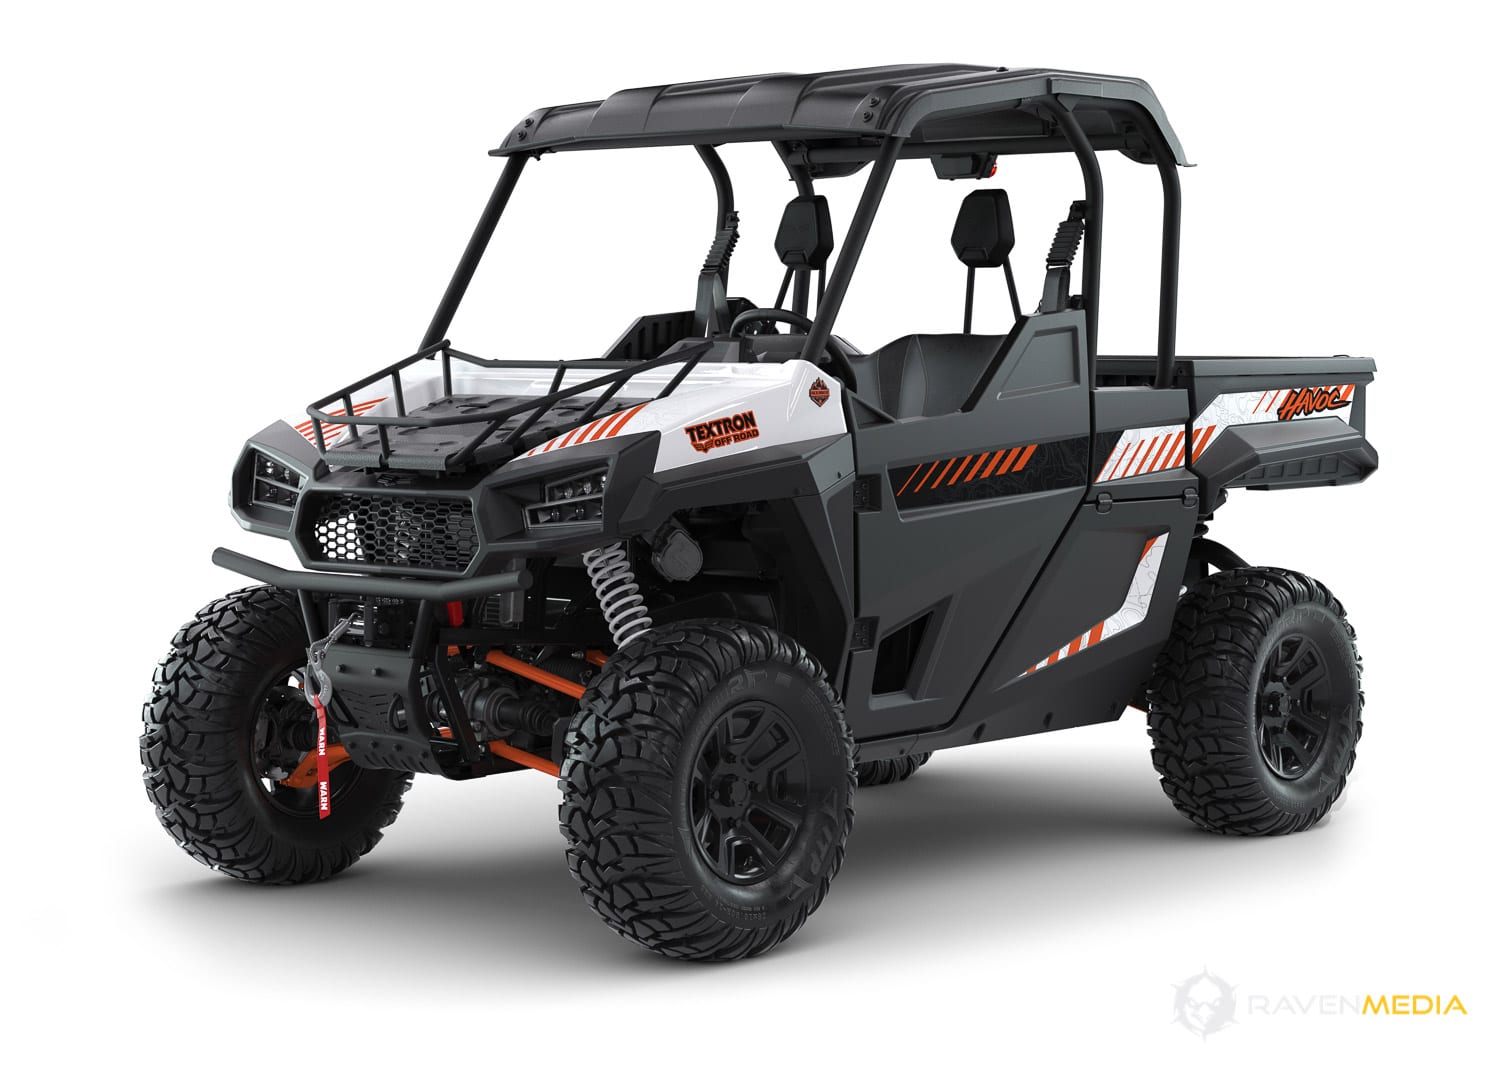 2019 Textron Off Road Havoc Backcountry Edition